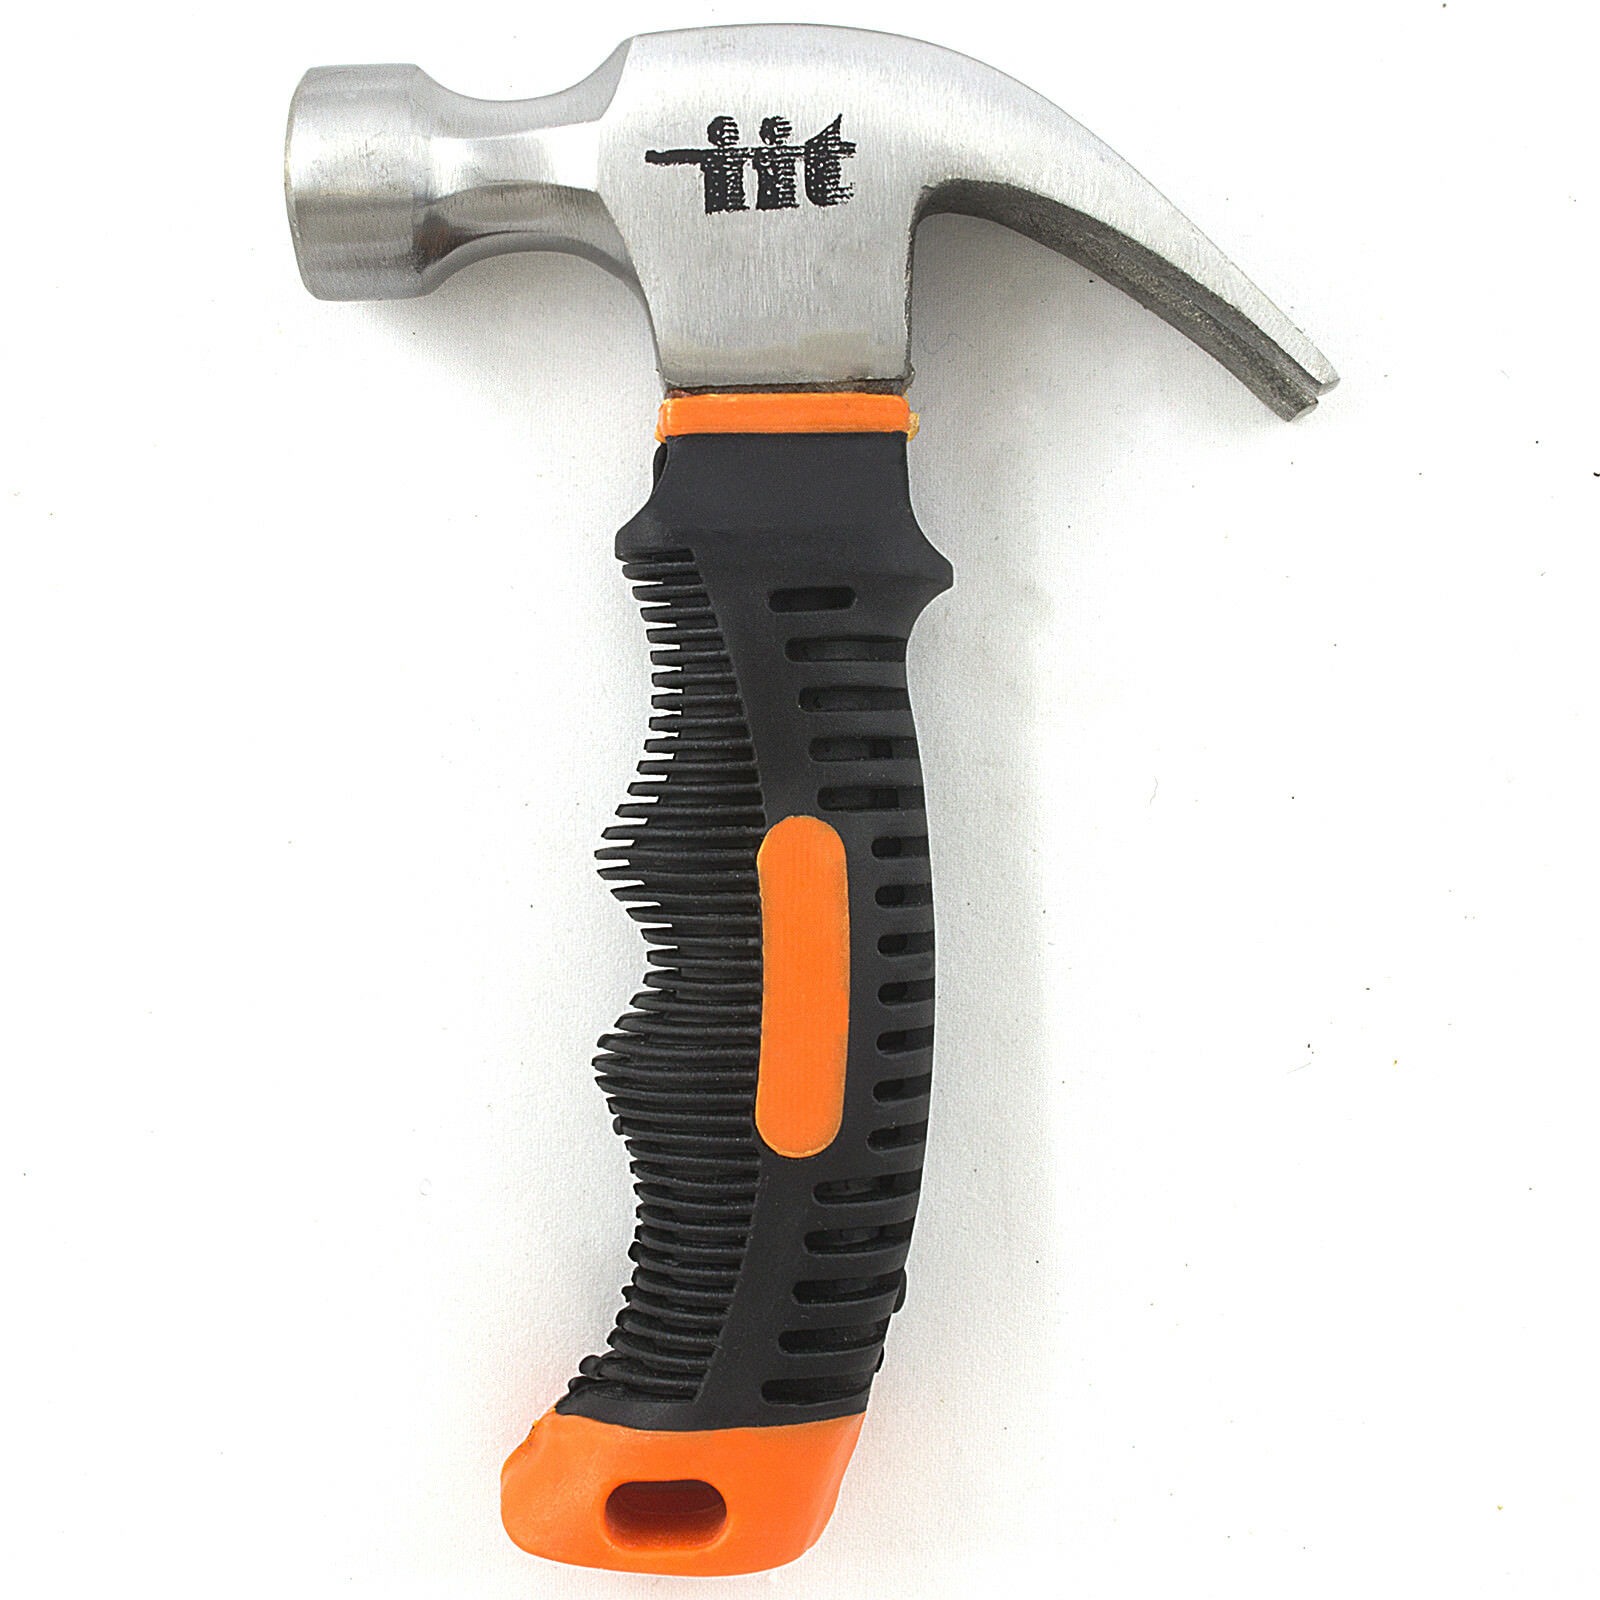 12 Oz Stubby Claw Hammer W/ Magnetic Nail Holder Ounce Small Head Fiberglass